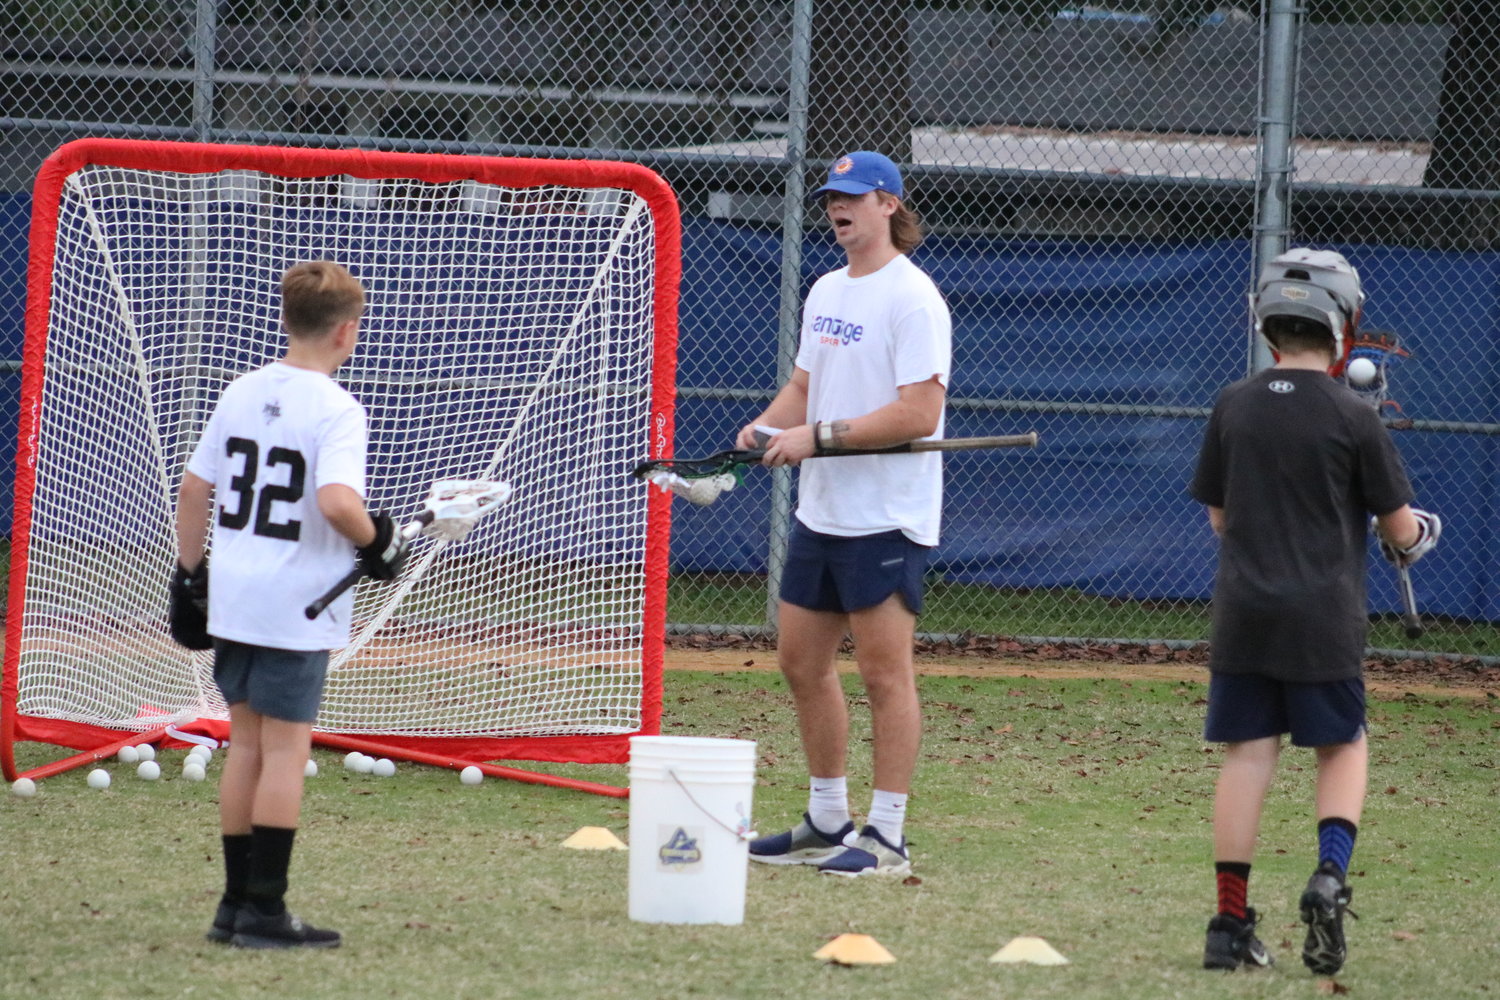 Matt Pounder focused on teaching the fundamentals of lacrosse during the clinic.